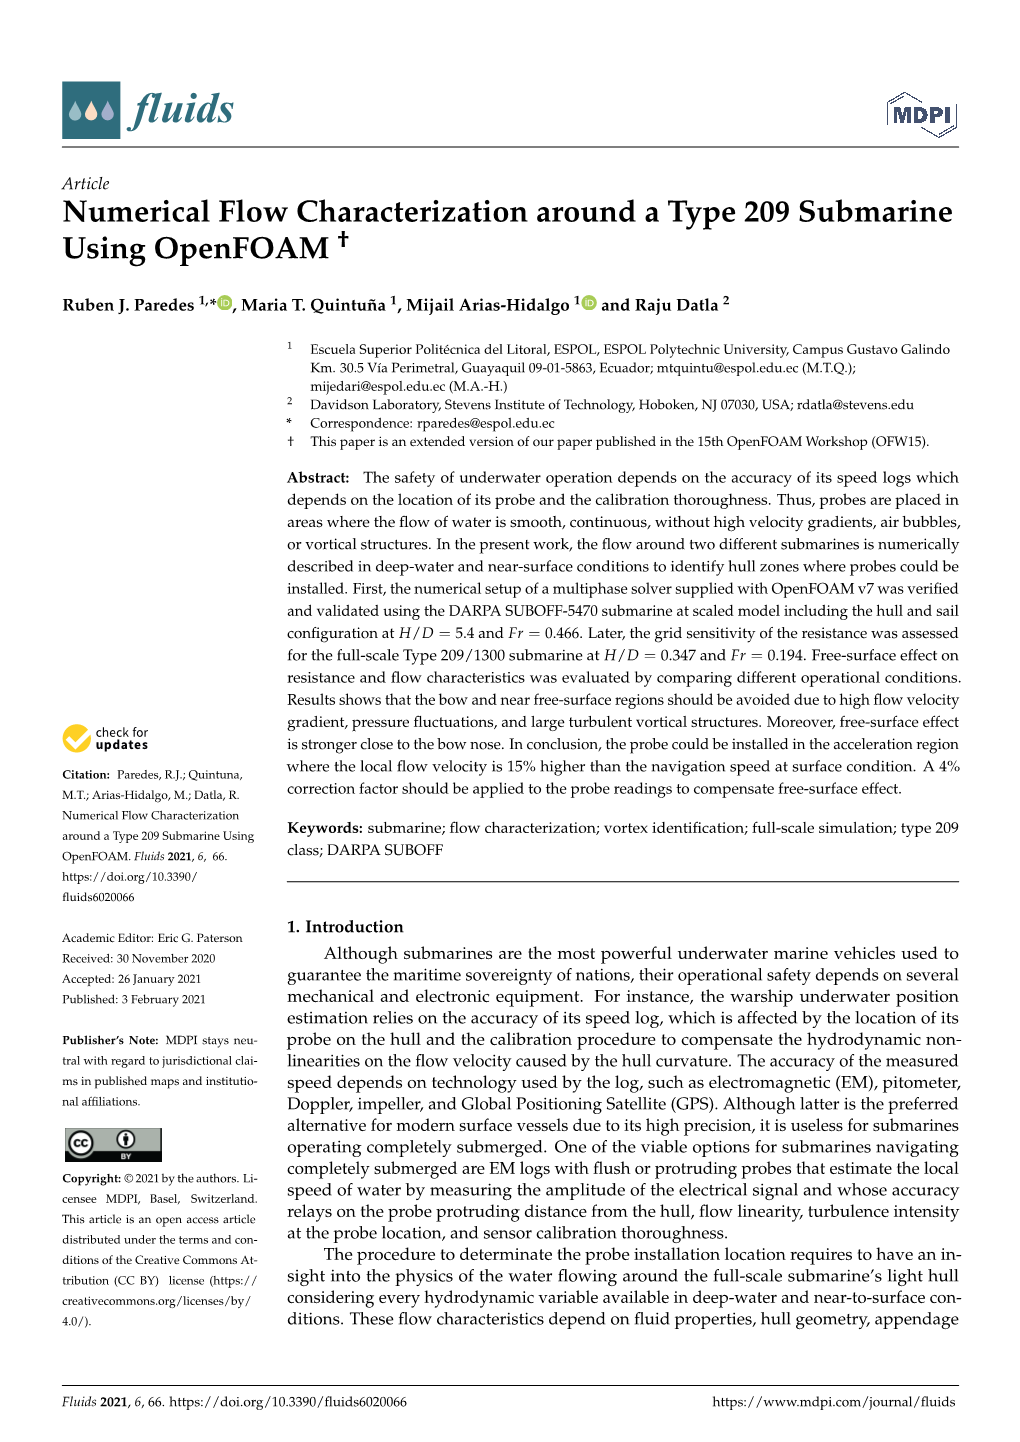 Numerical Flow Characterization Around a Type 209 Submarine Using Openfoam †